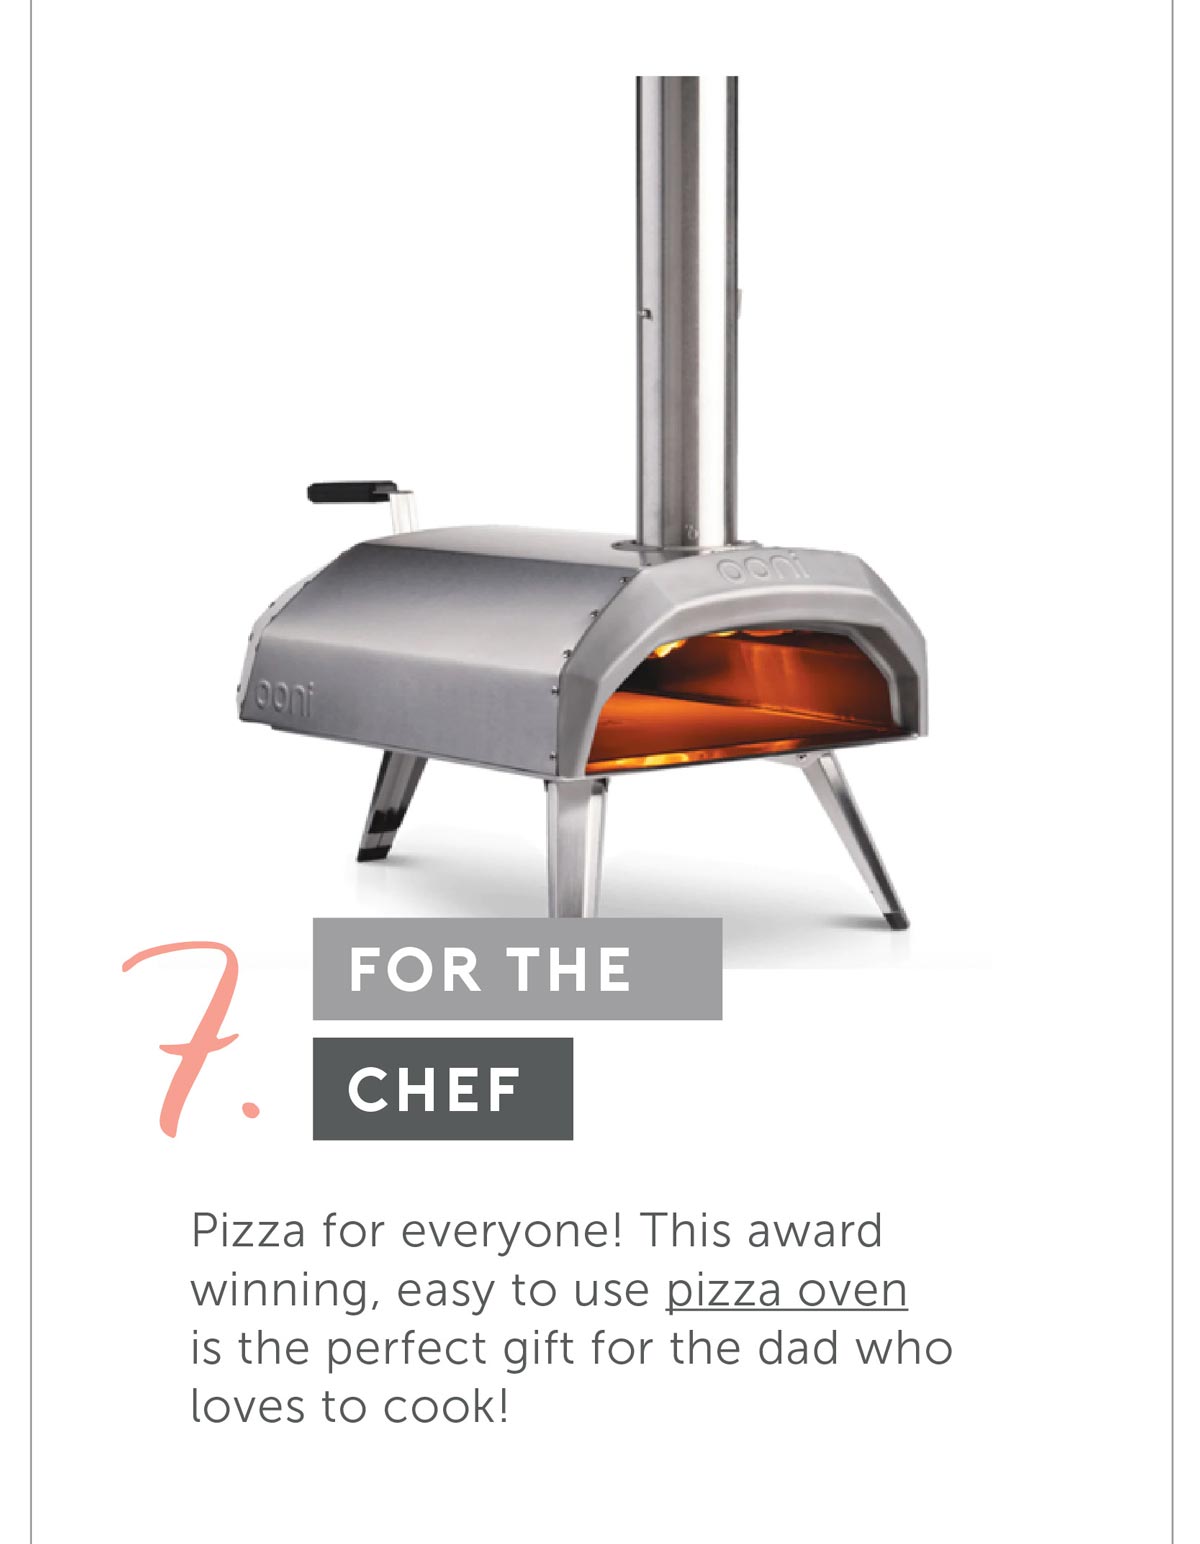 For The Chef. Pizza for everyone! This award winning, easy to use pizza oven is the perfect gift for the dad who loves to cook!